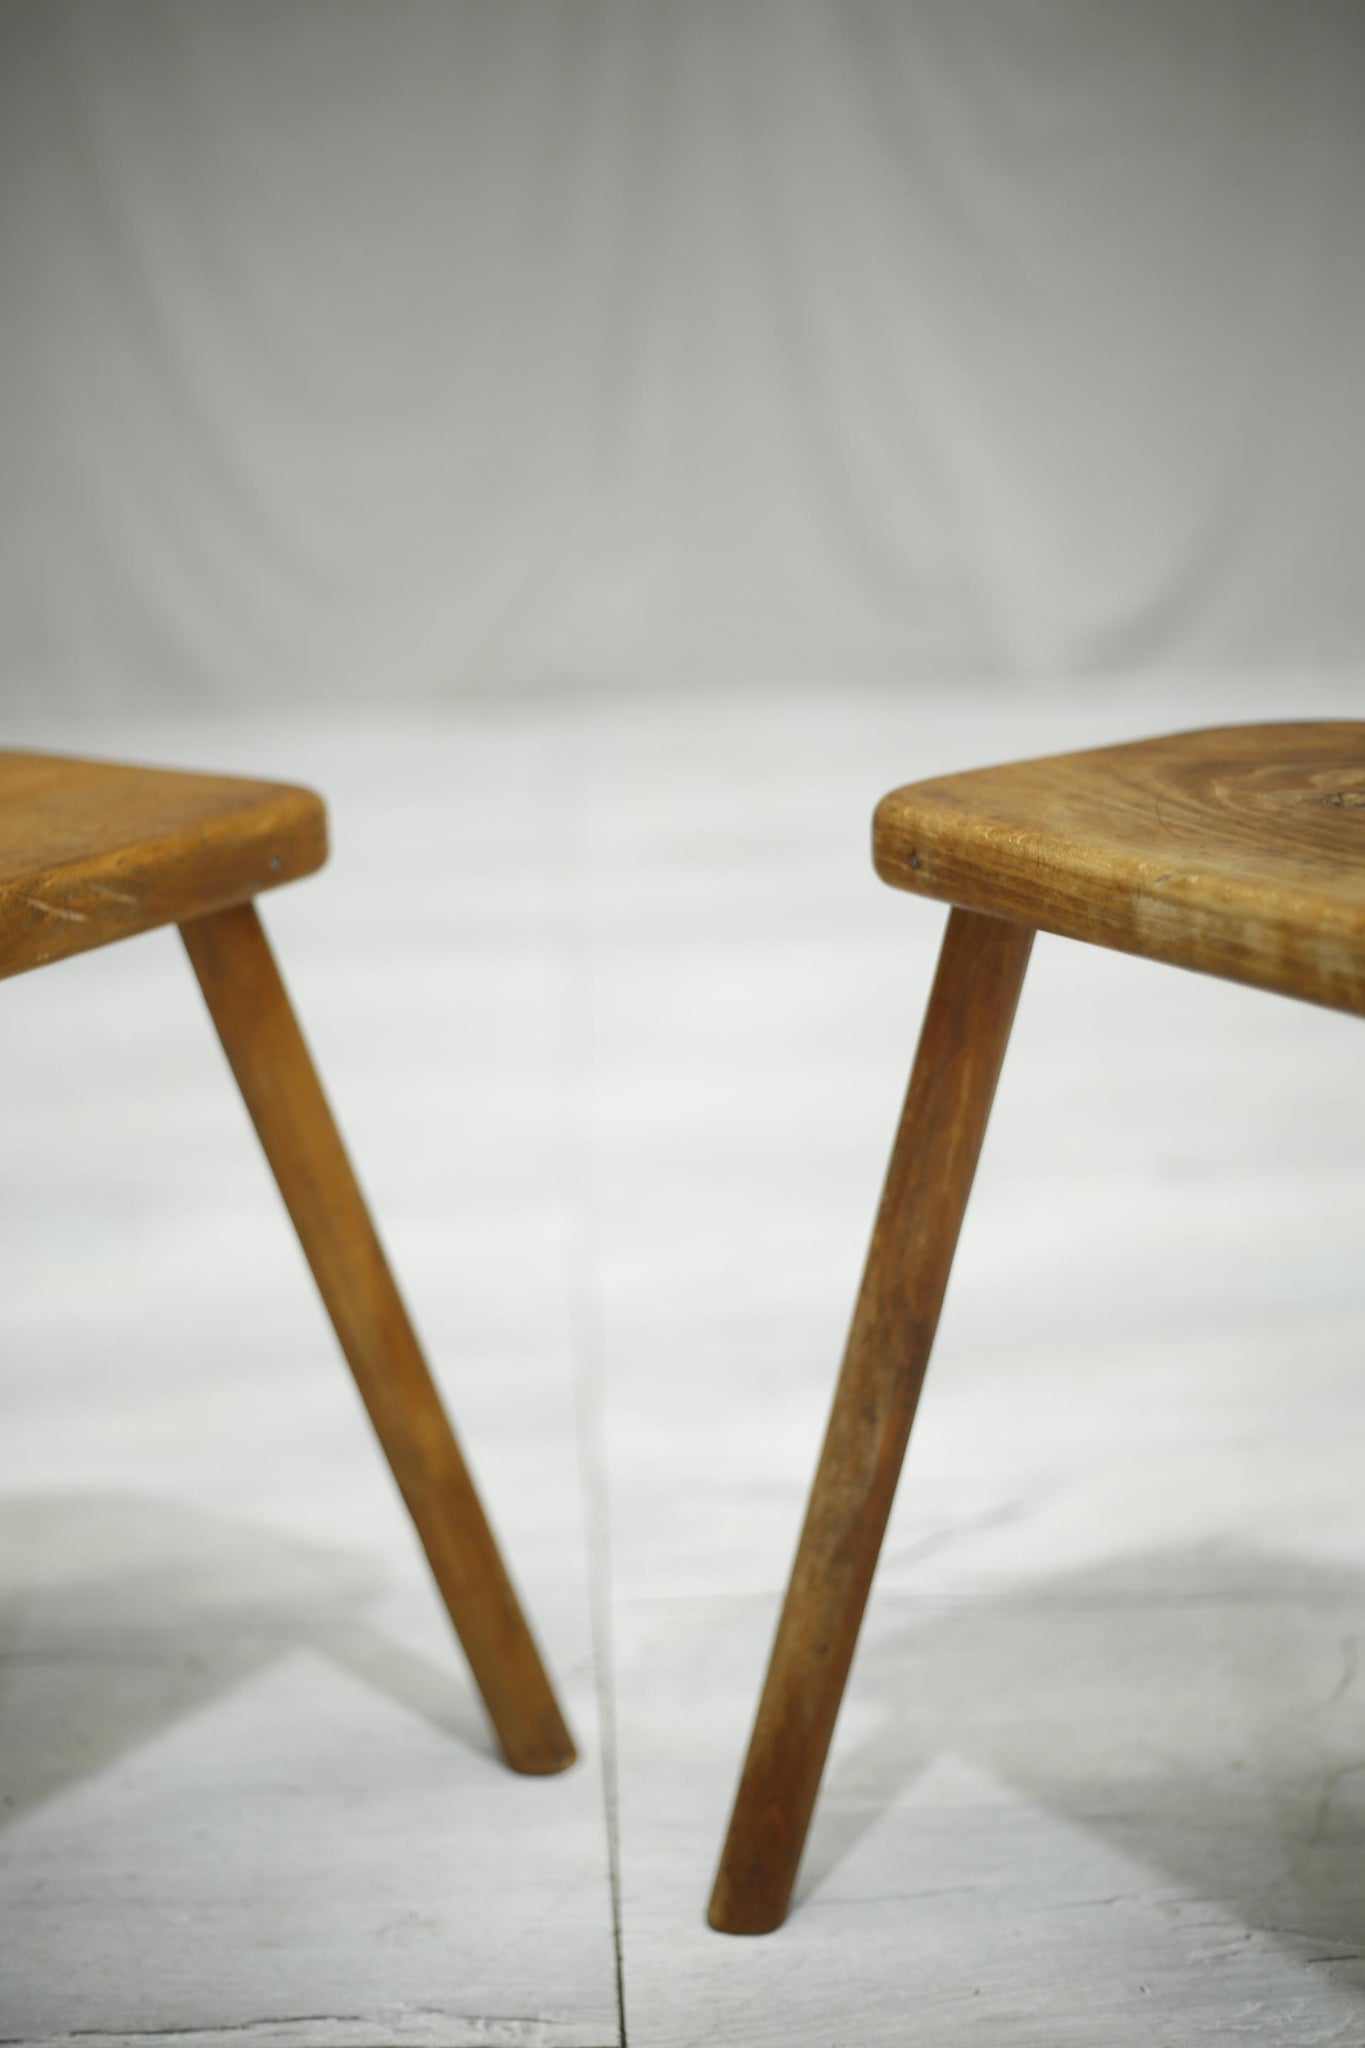 Pair of 20th century French elm country stools No1